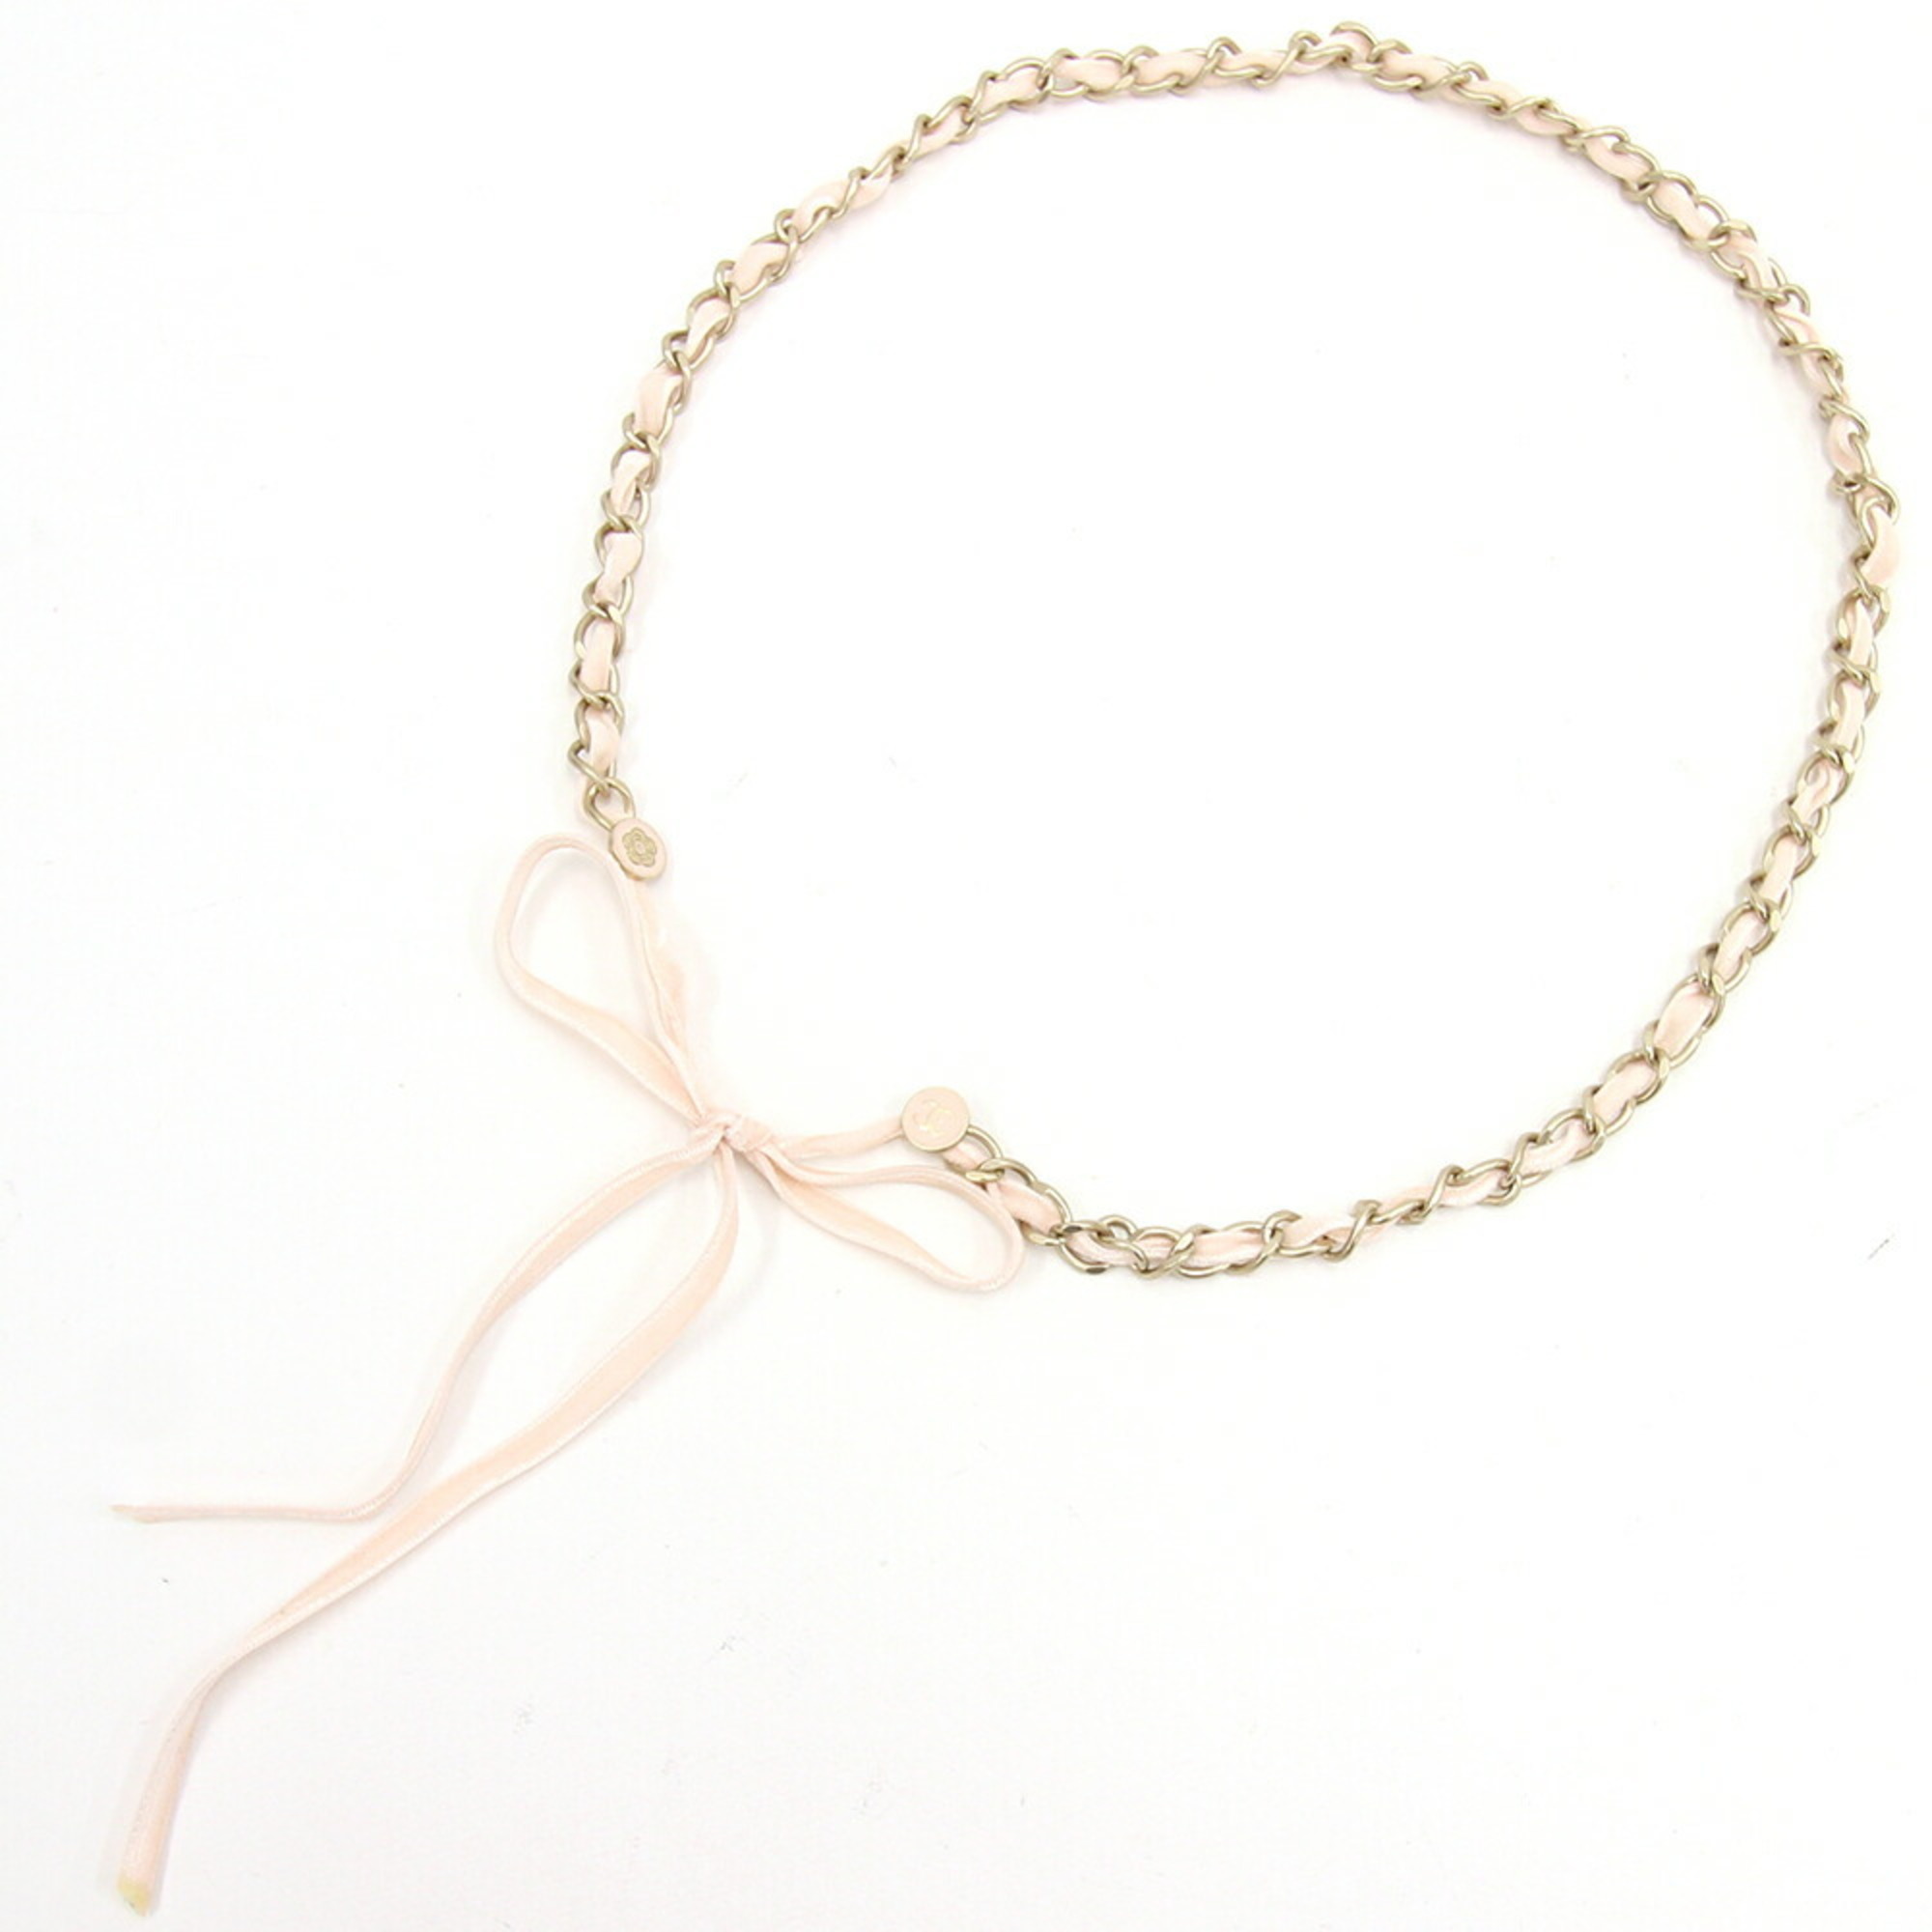 Chanel Chain Belt Baby Pink 06P 2006 Made Women's Coco Mark Camellia CHANEL